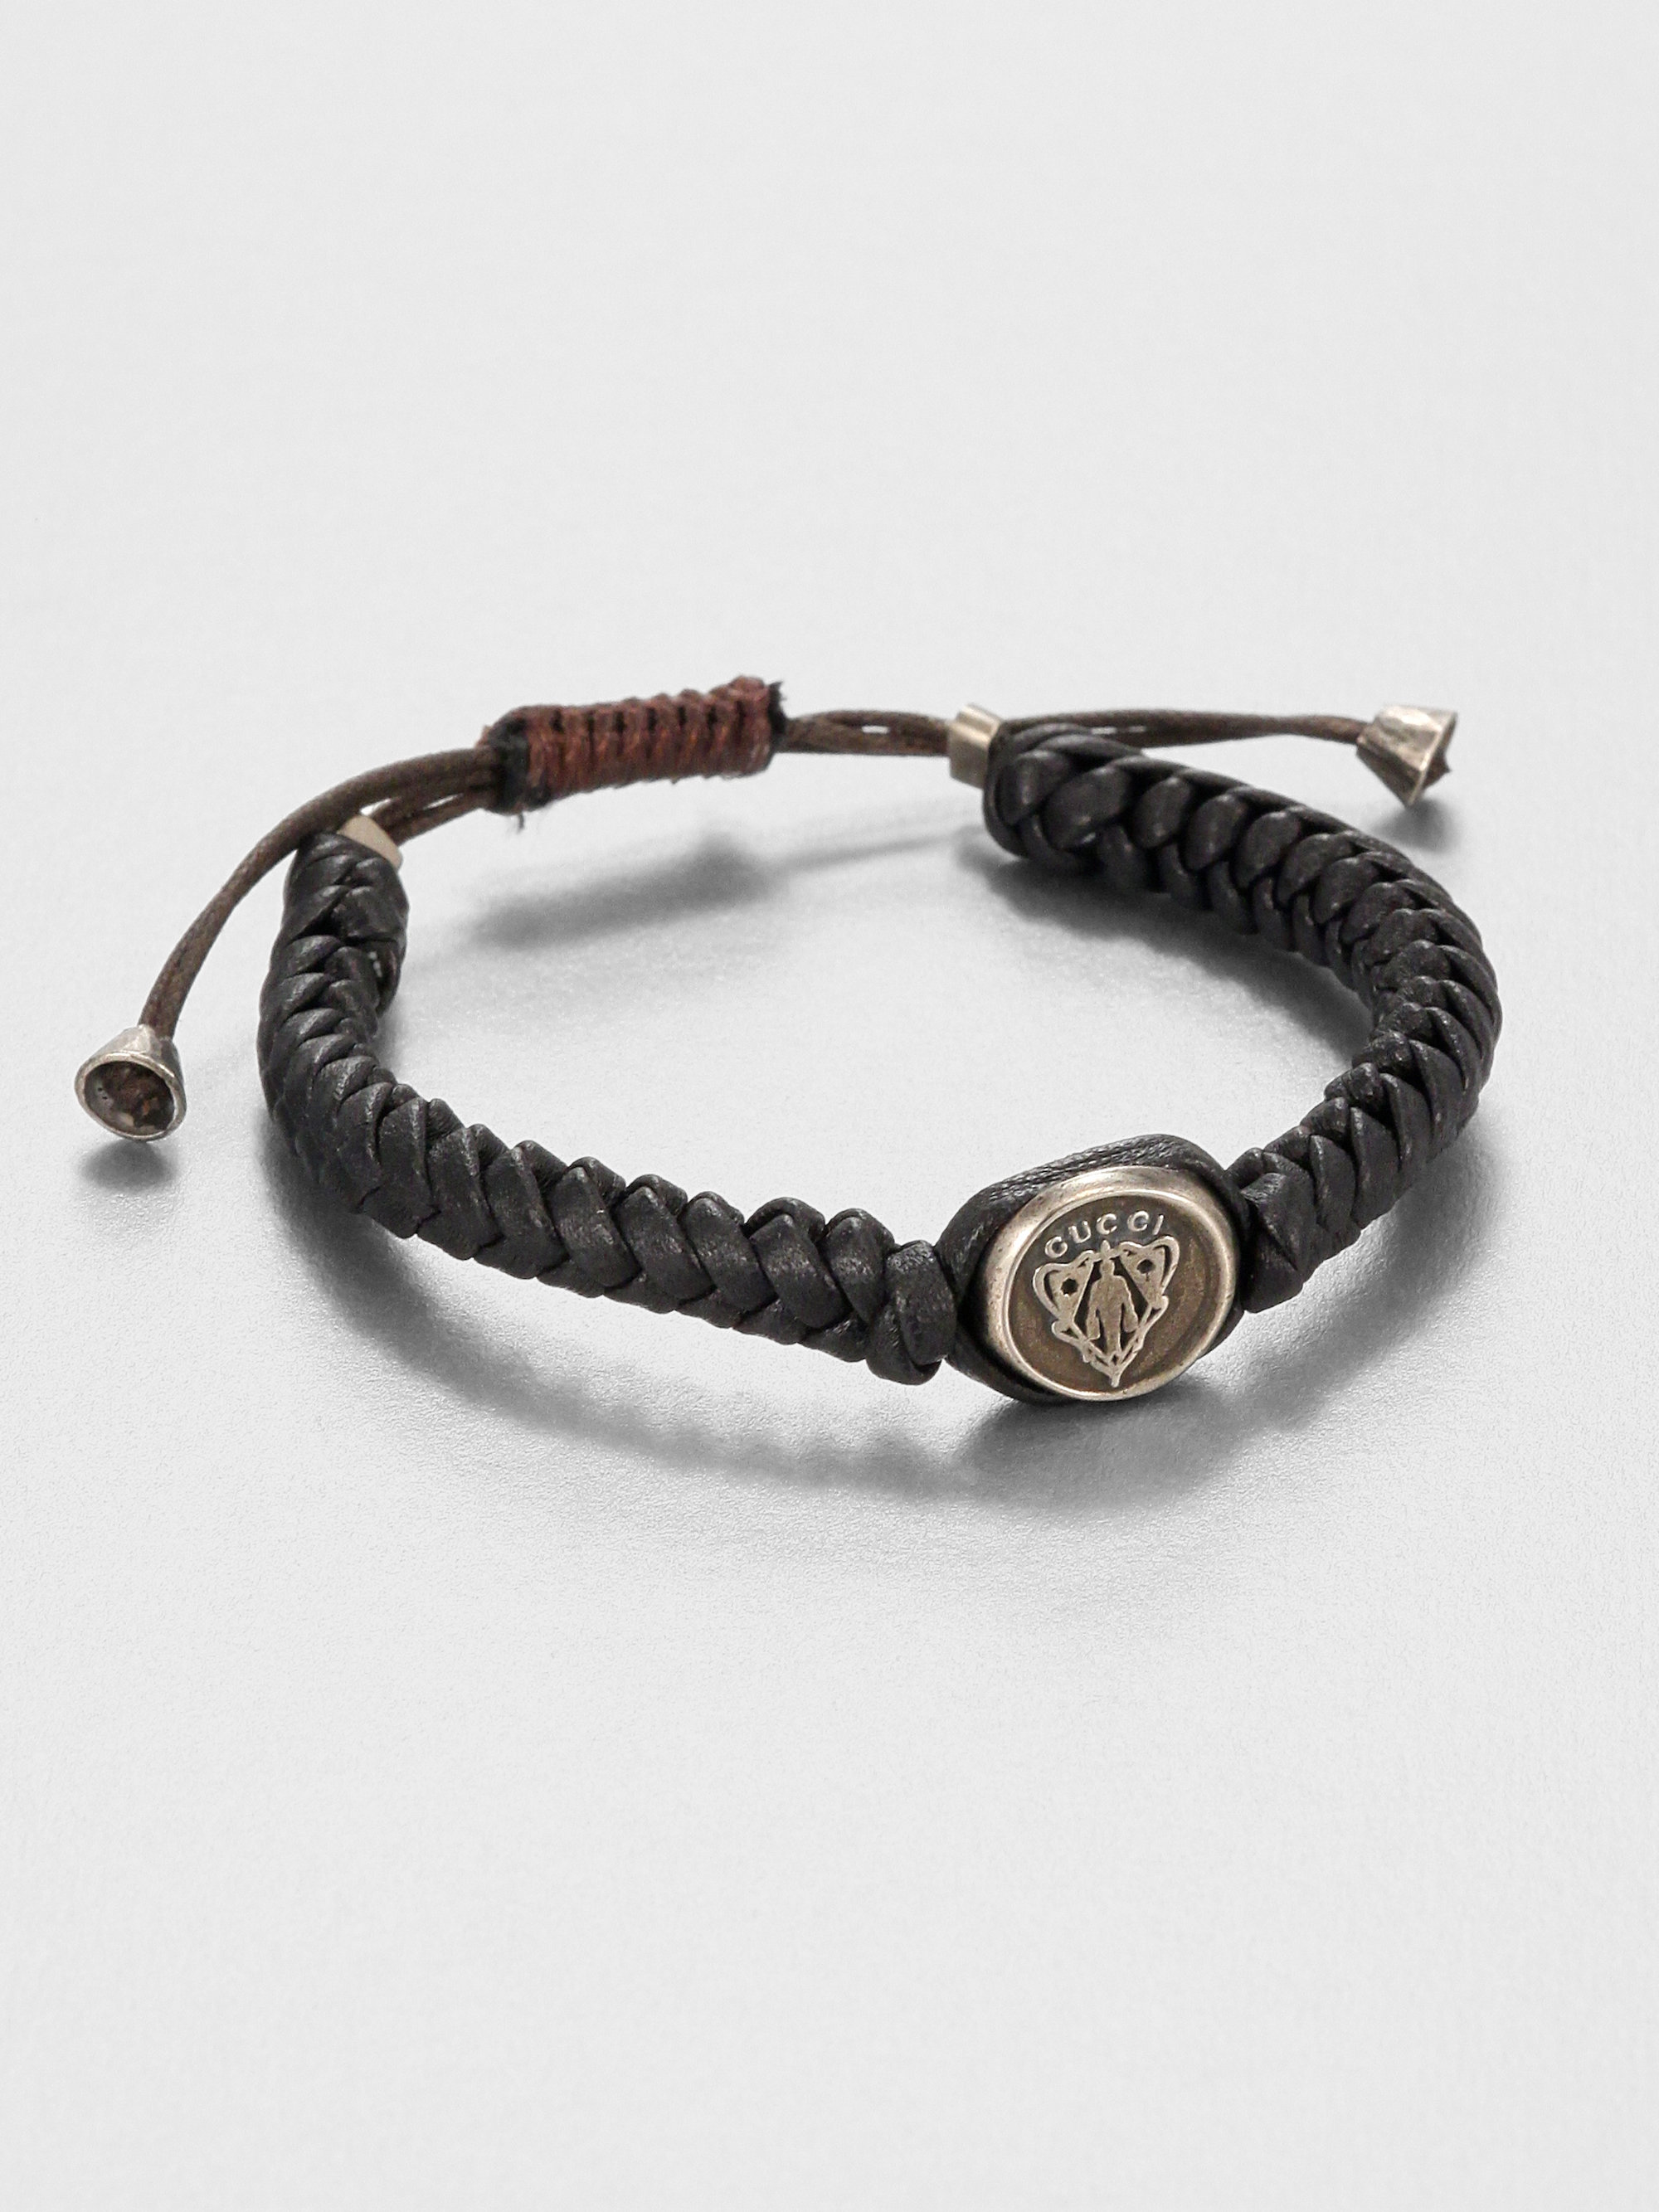 Gucci Woven Leather Bracelet in Brown 